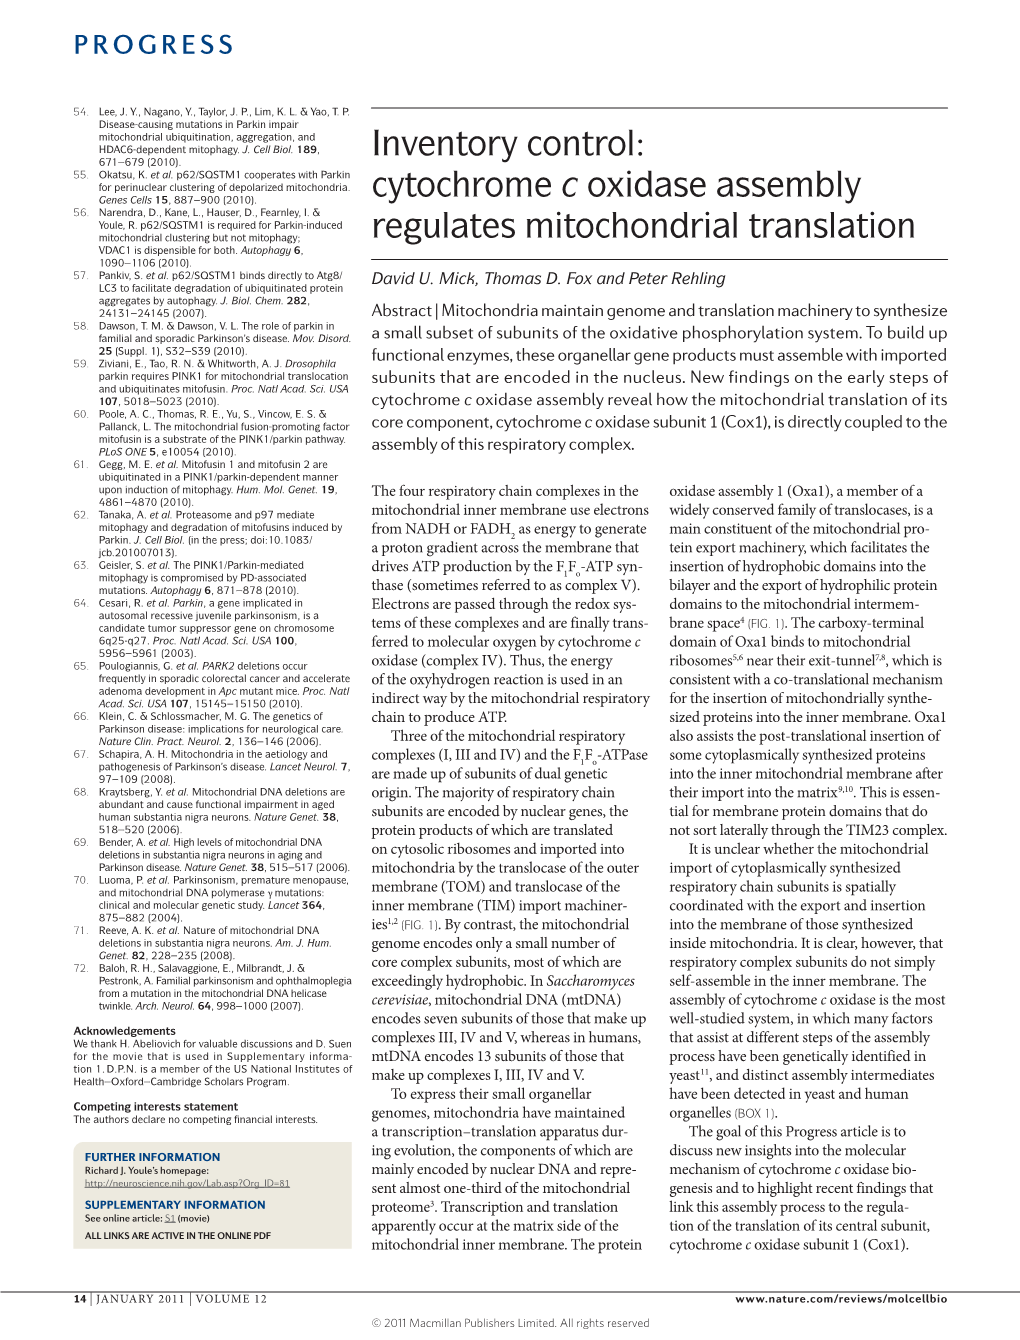 Cytochrome C Oxidase Assembly Regulates